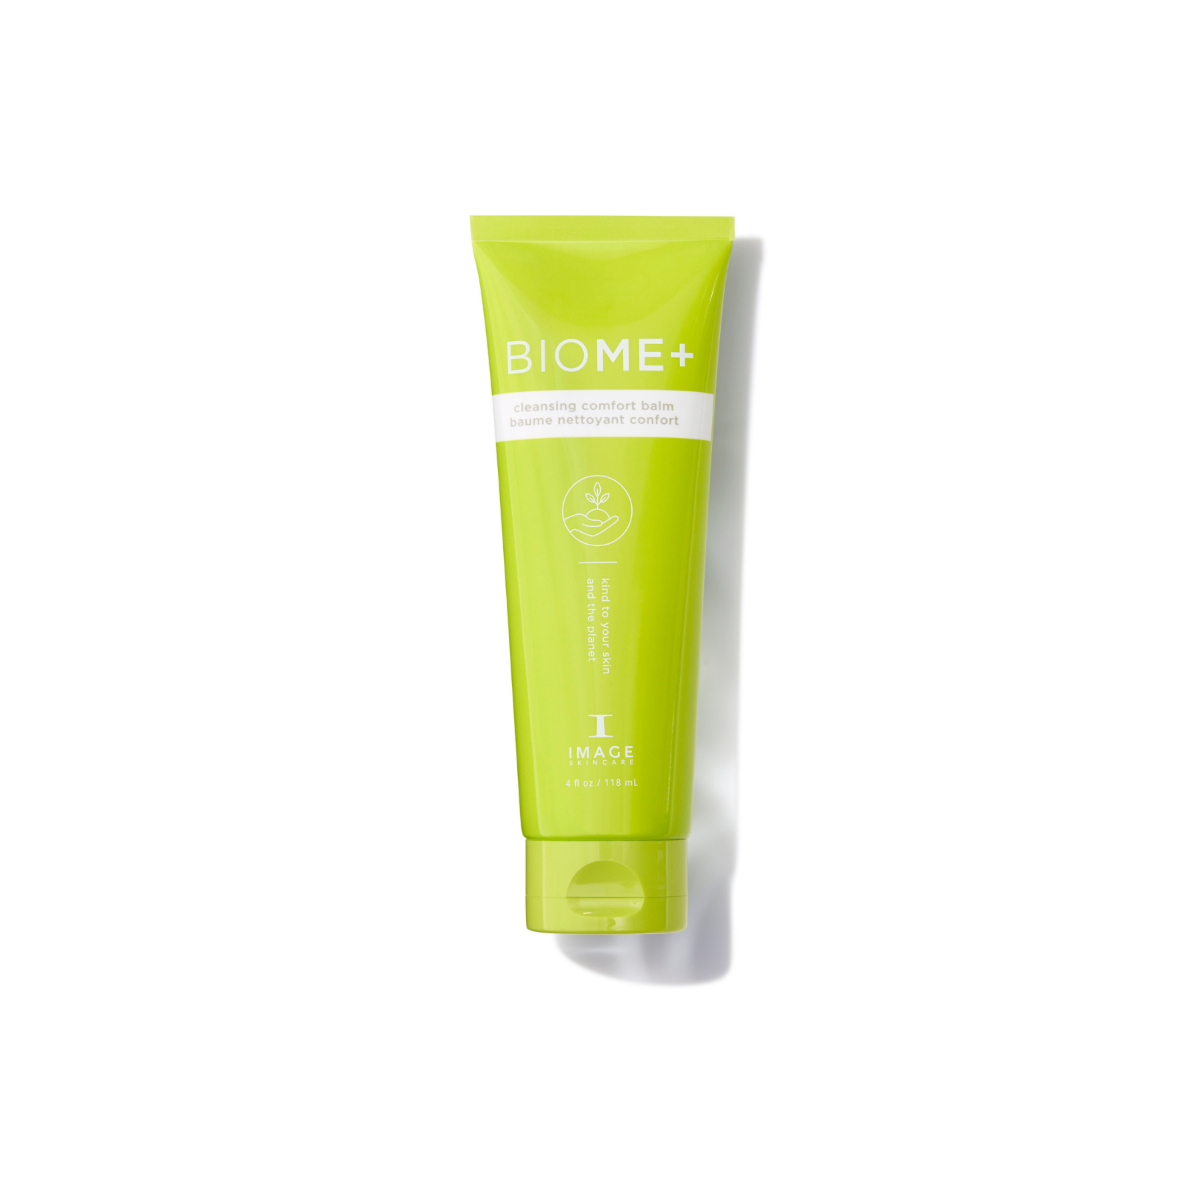 BIOME+™ cleansing comfort balm 118 ml